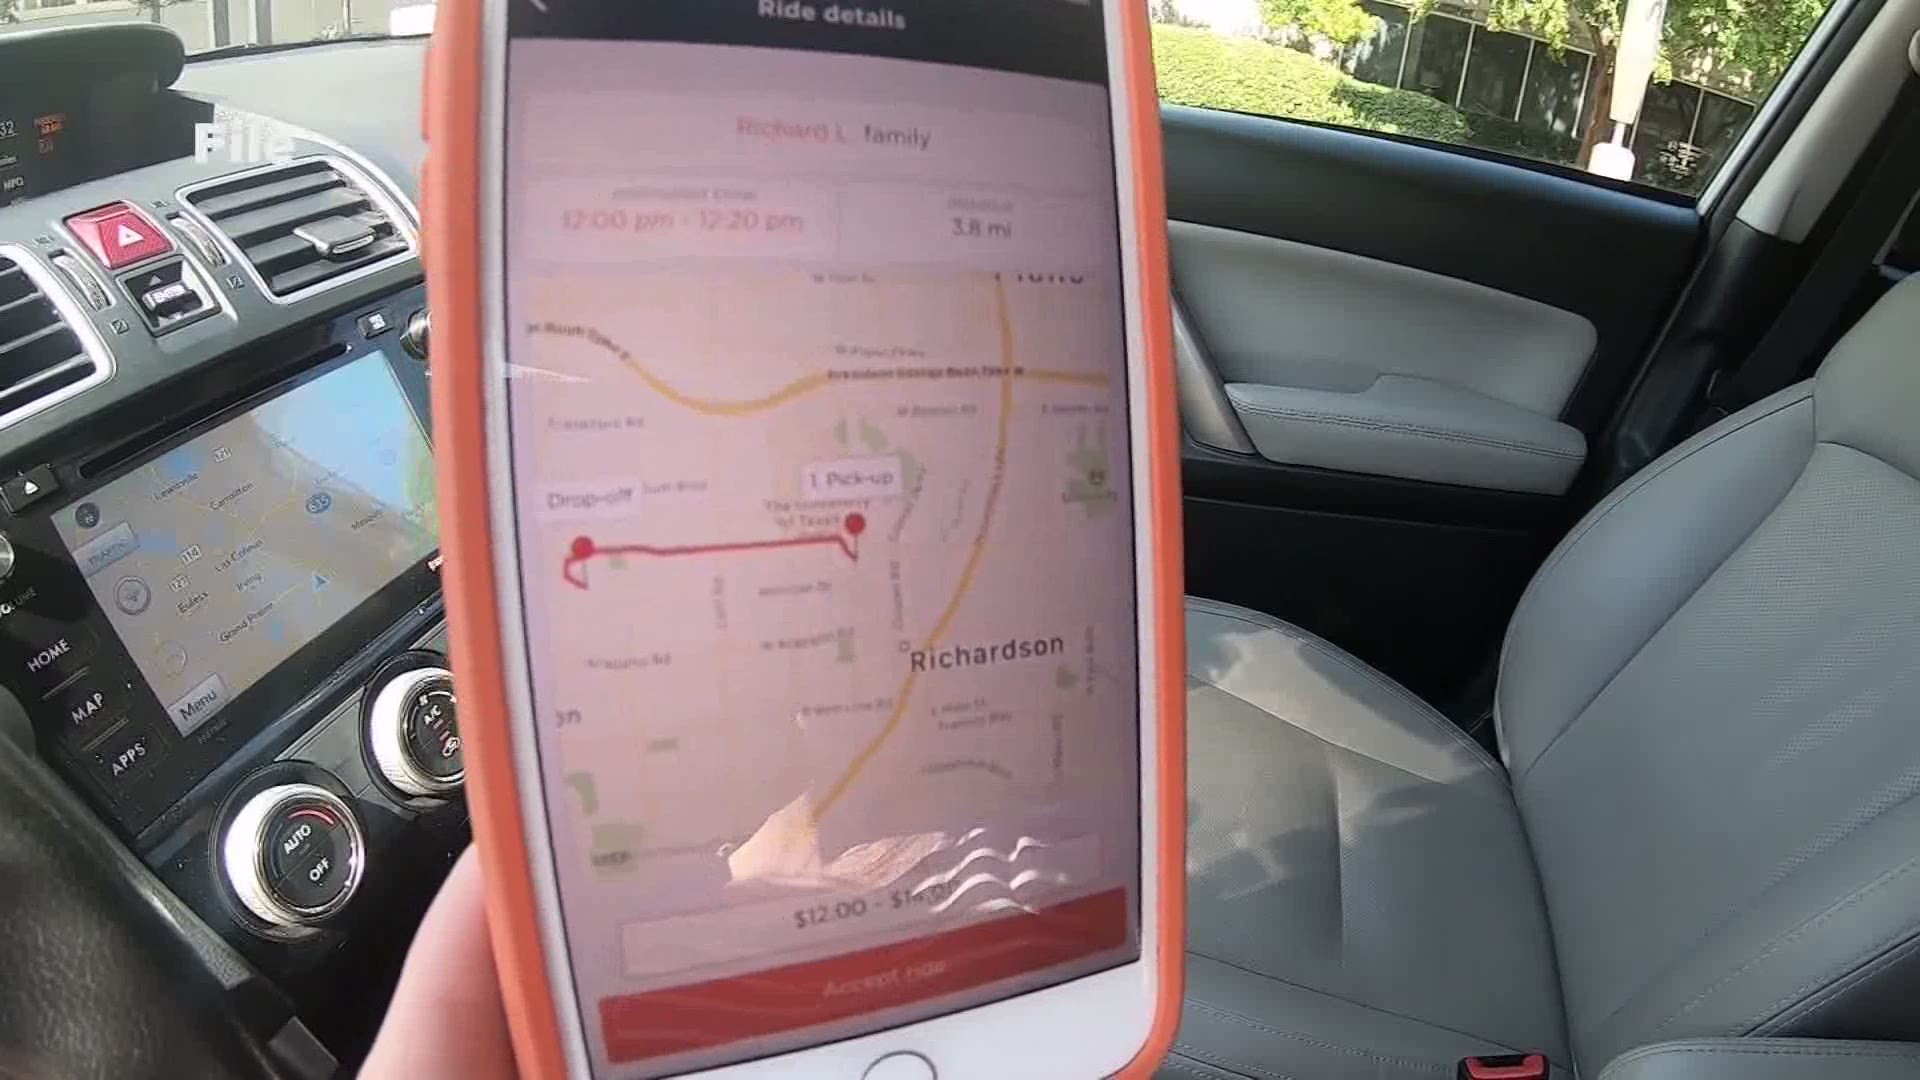 The app, which officially launched in Grand Rapids this month, lets parents schedule rides for their children when they aren't able to drive them.